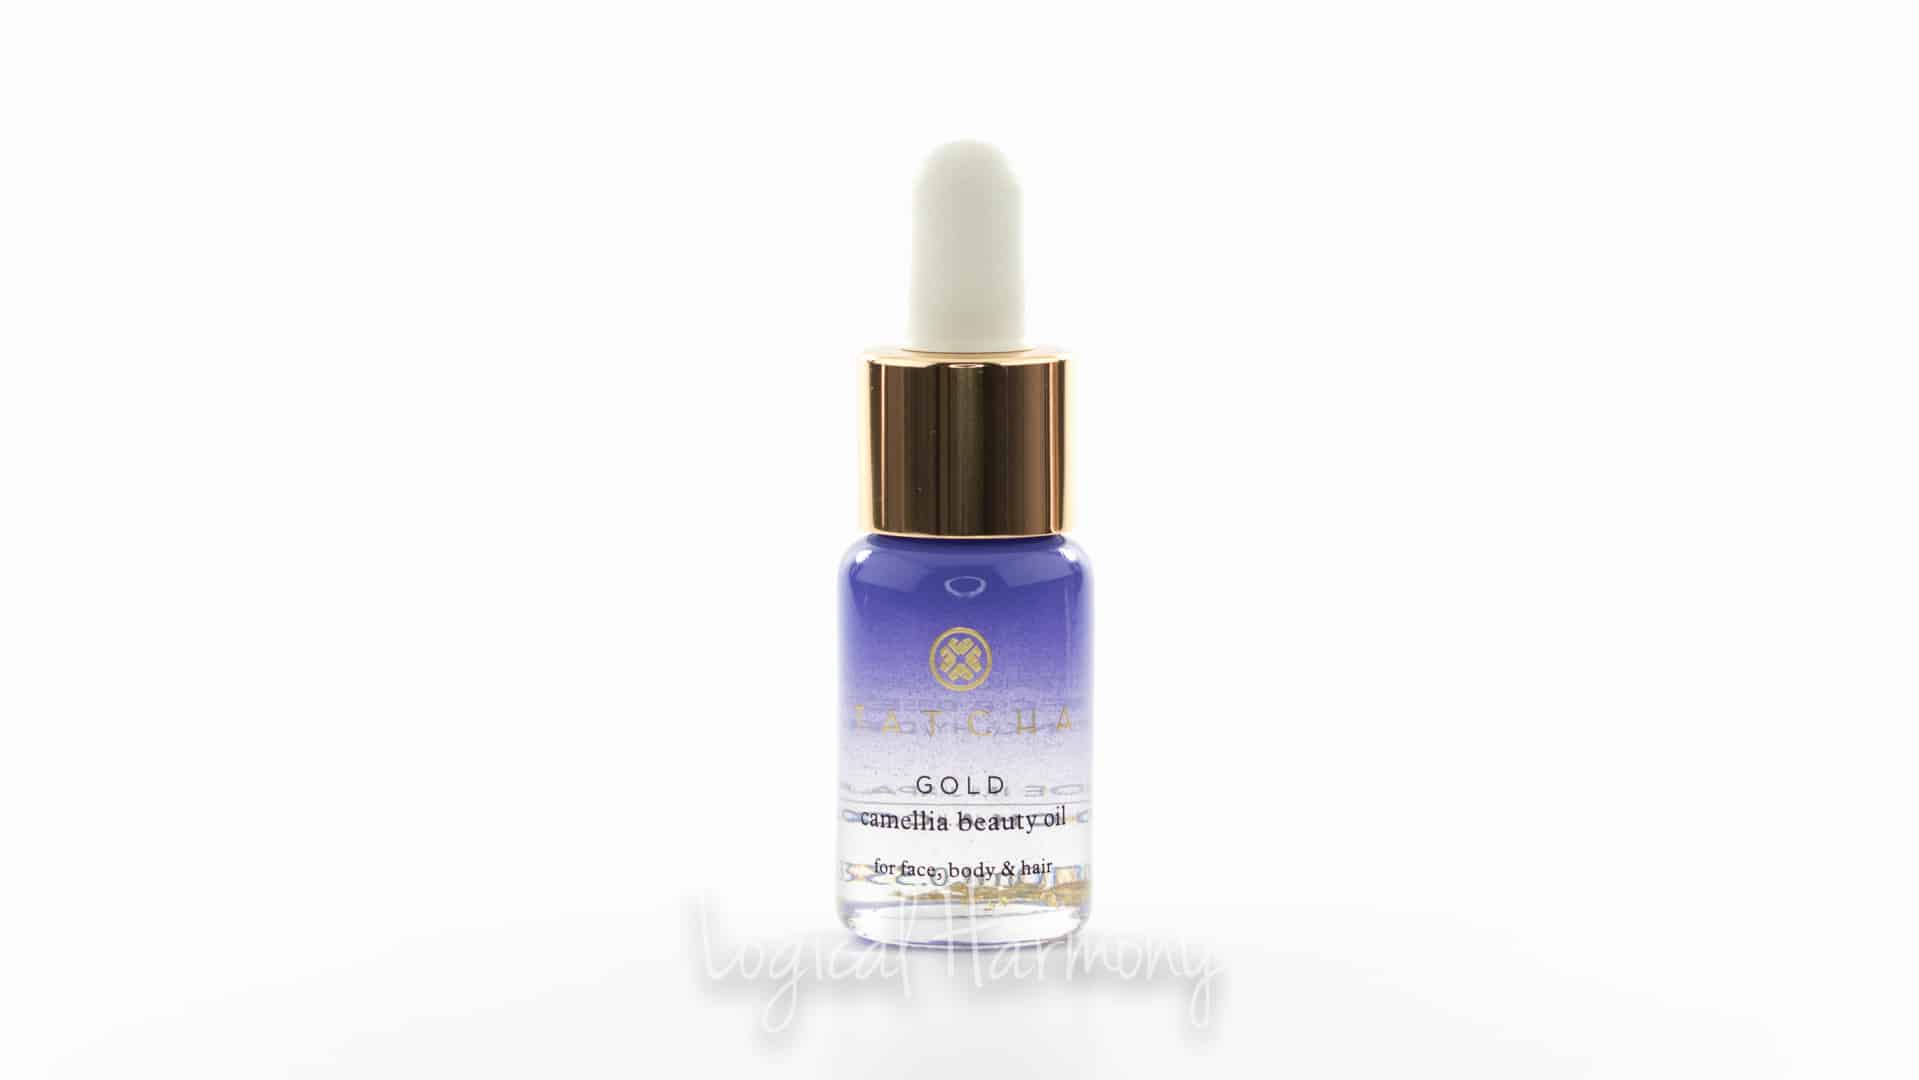 Tatcha Camellia Beauty Oil Review